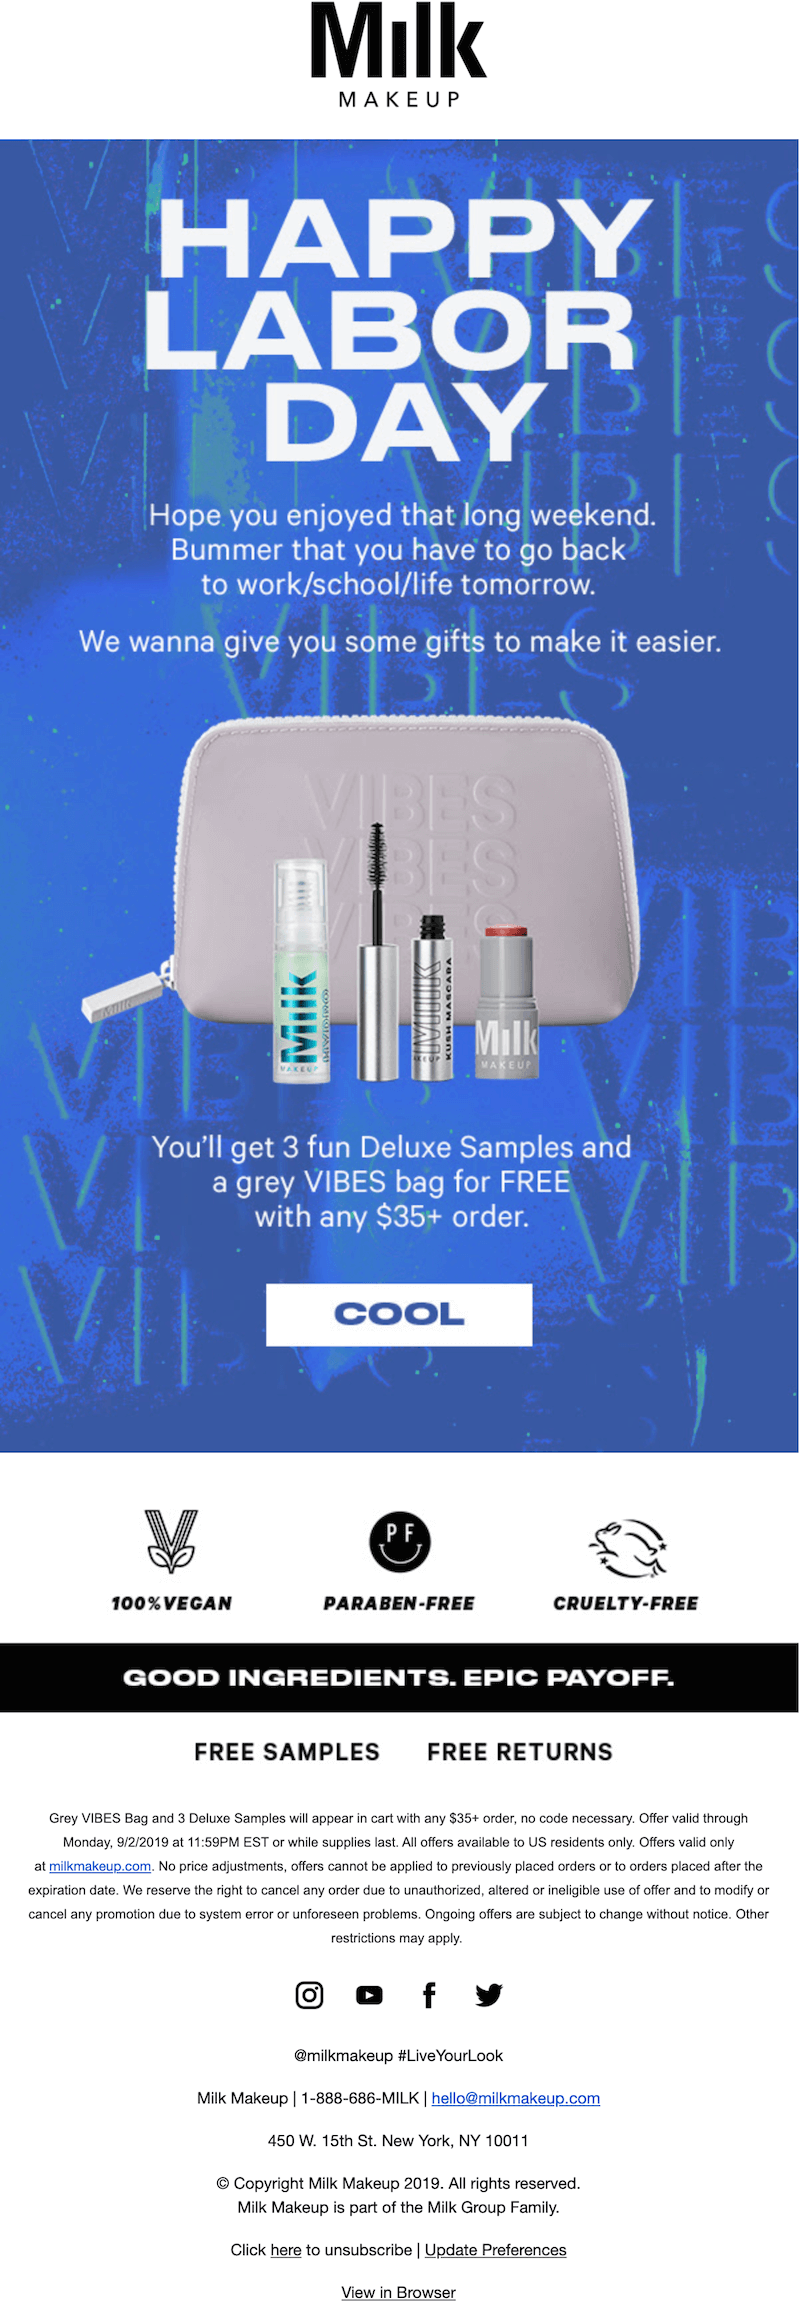 Labor Day gift email from Milk Makeup with a tagline “Bummer that you have to go back to school/work/life tomorrow”